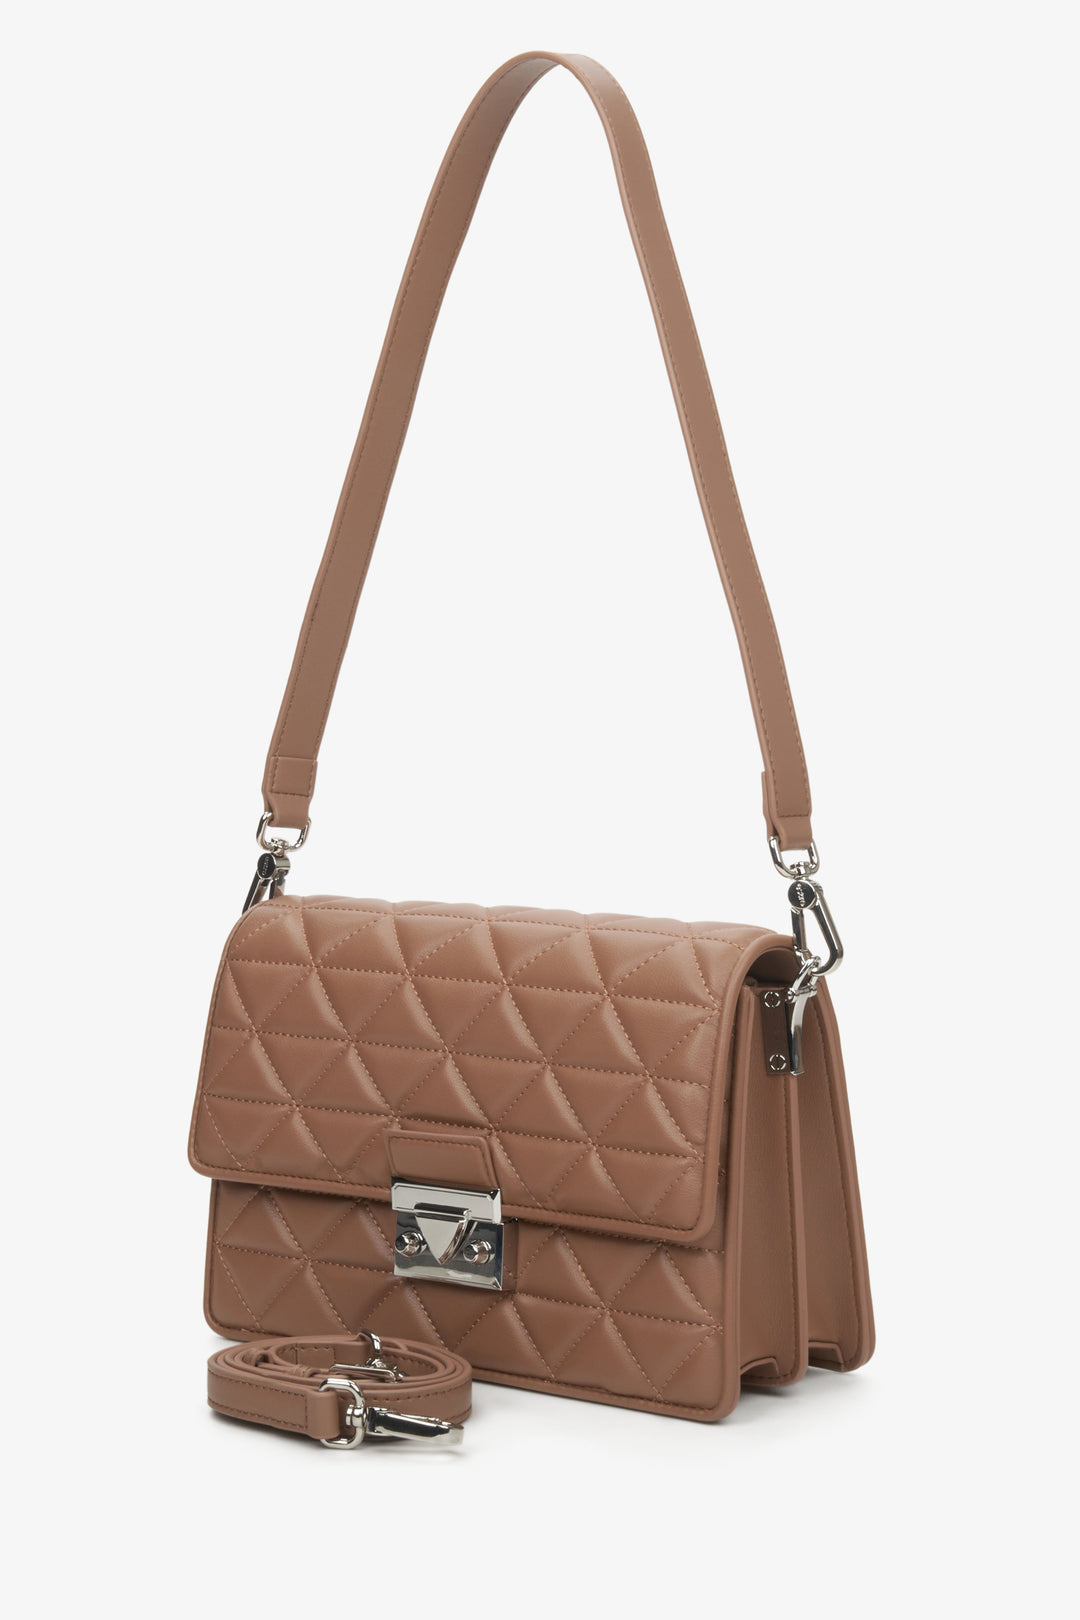 Women's brown shoulder bag made of quilted genuine leather by Estro.